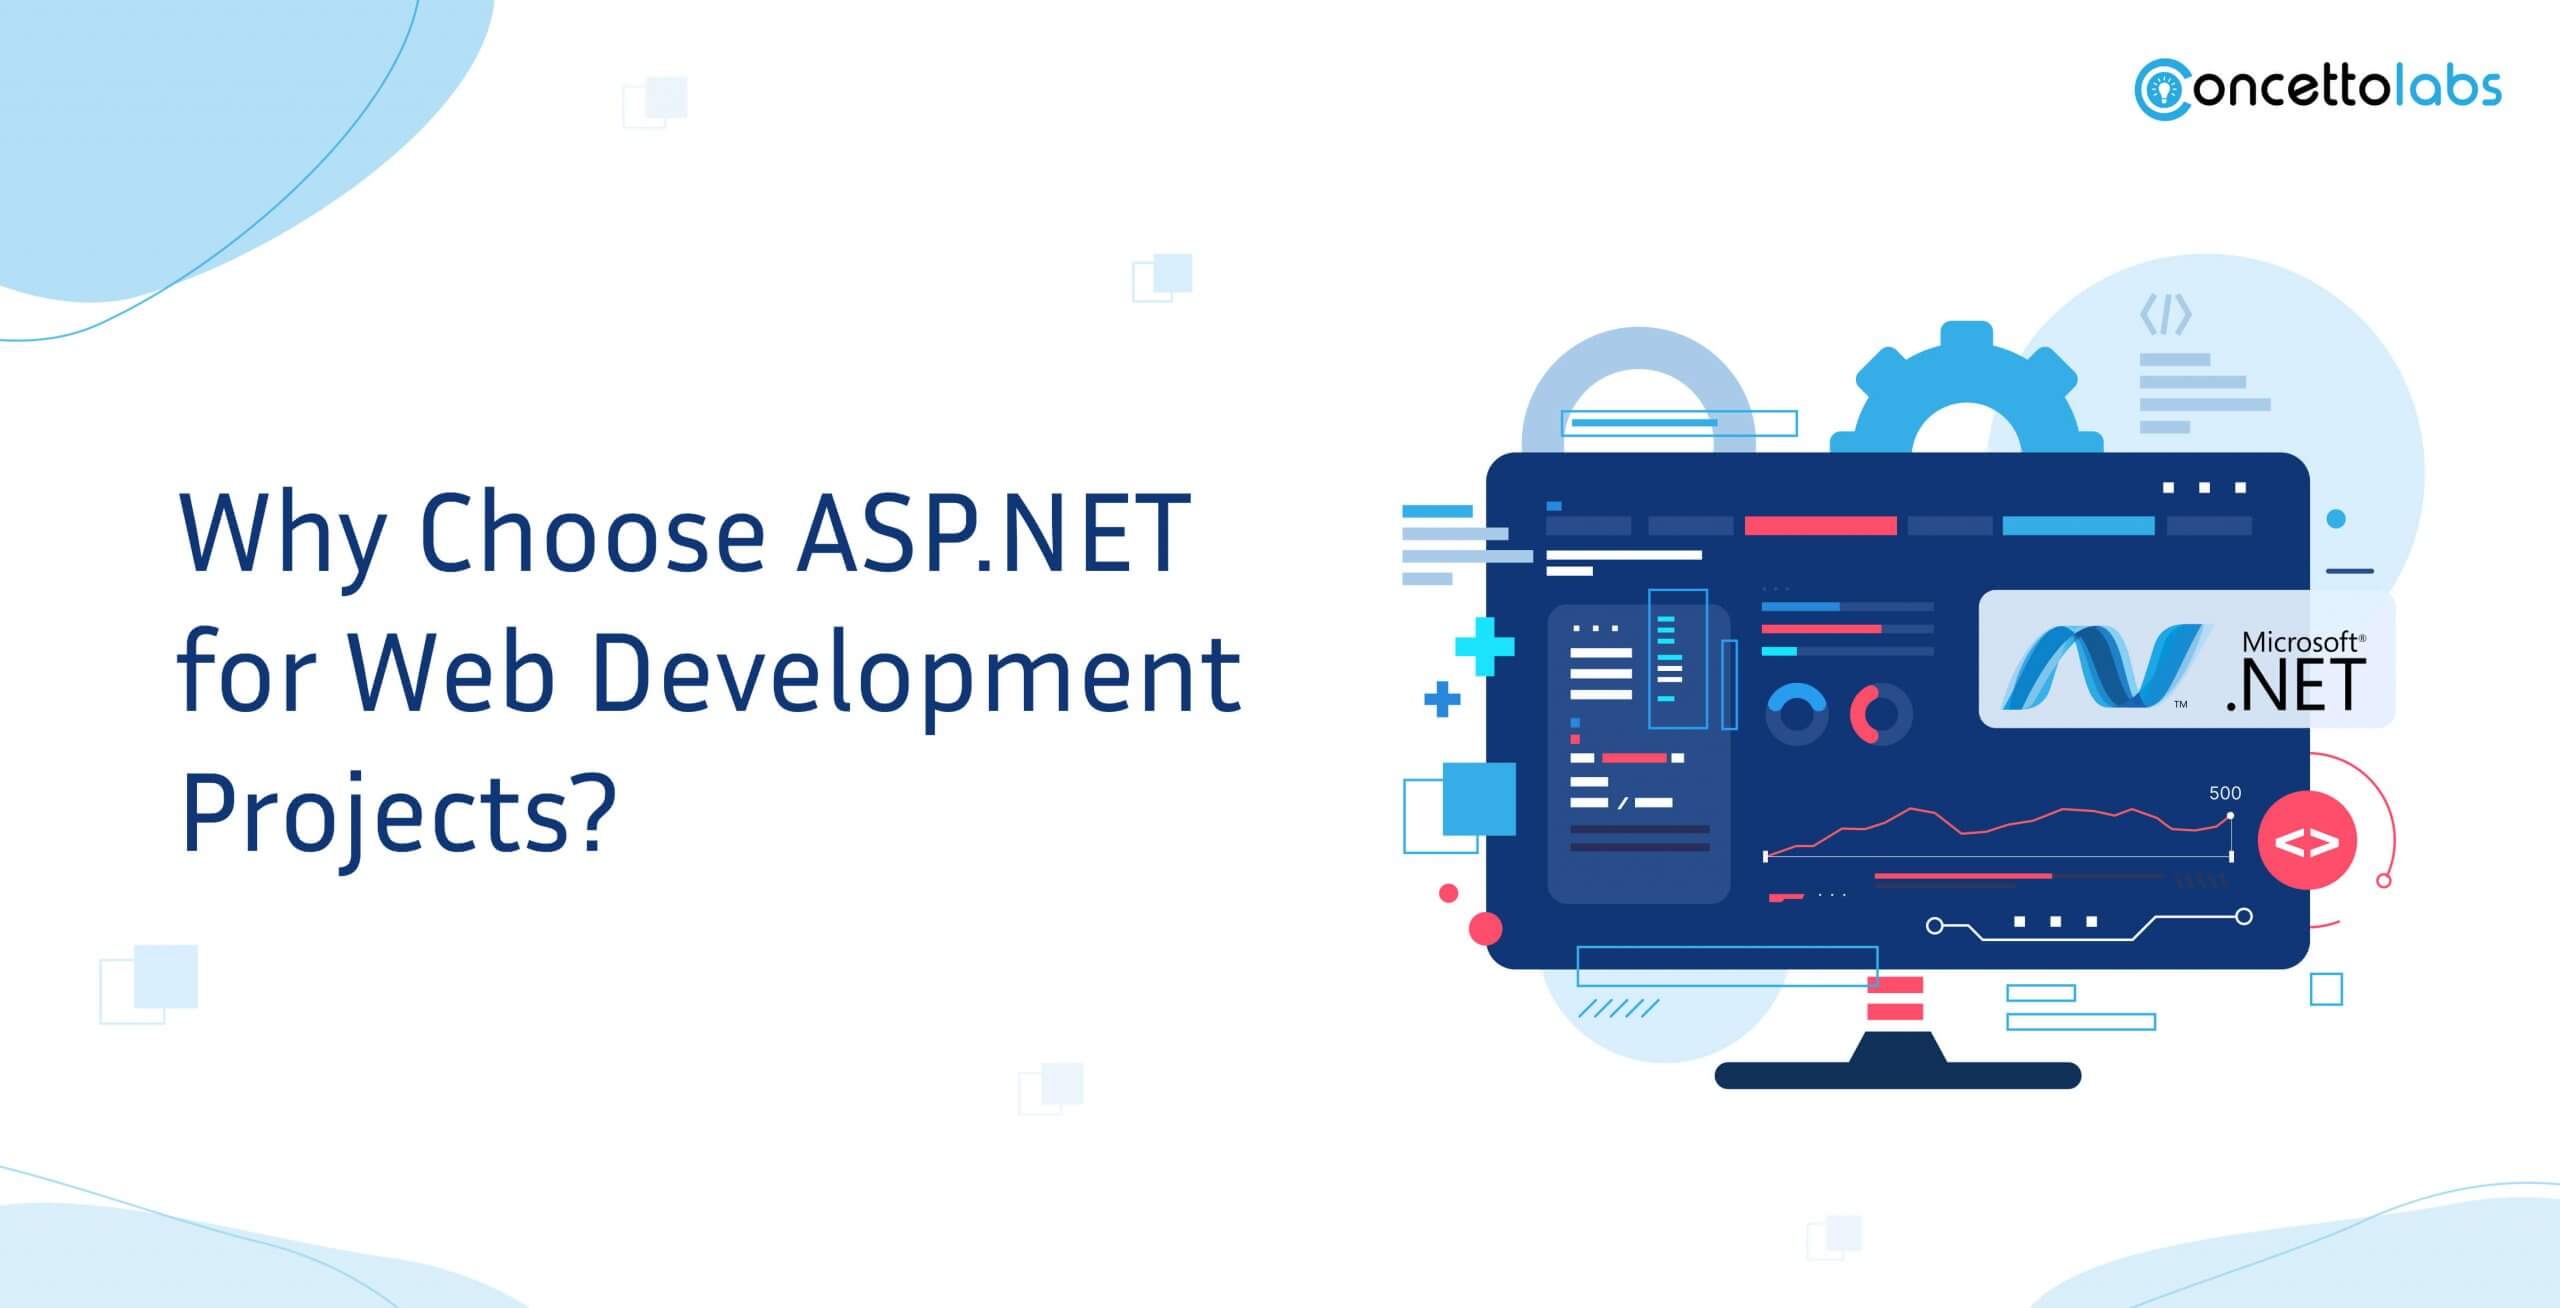 Why Choose ASP.NET for Web Development Projects?